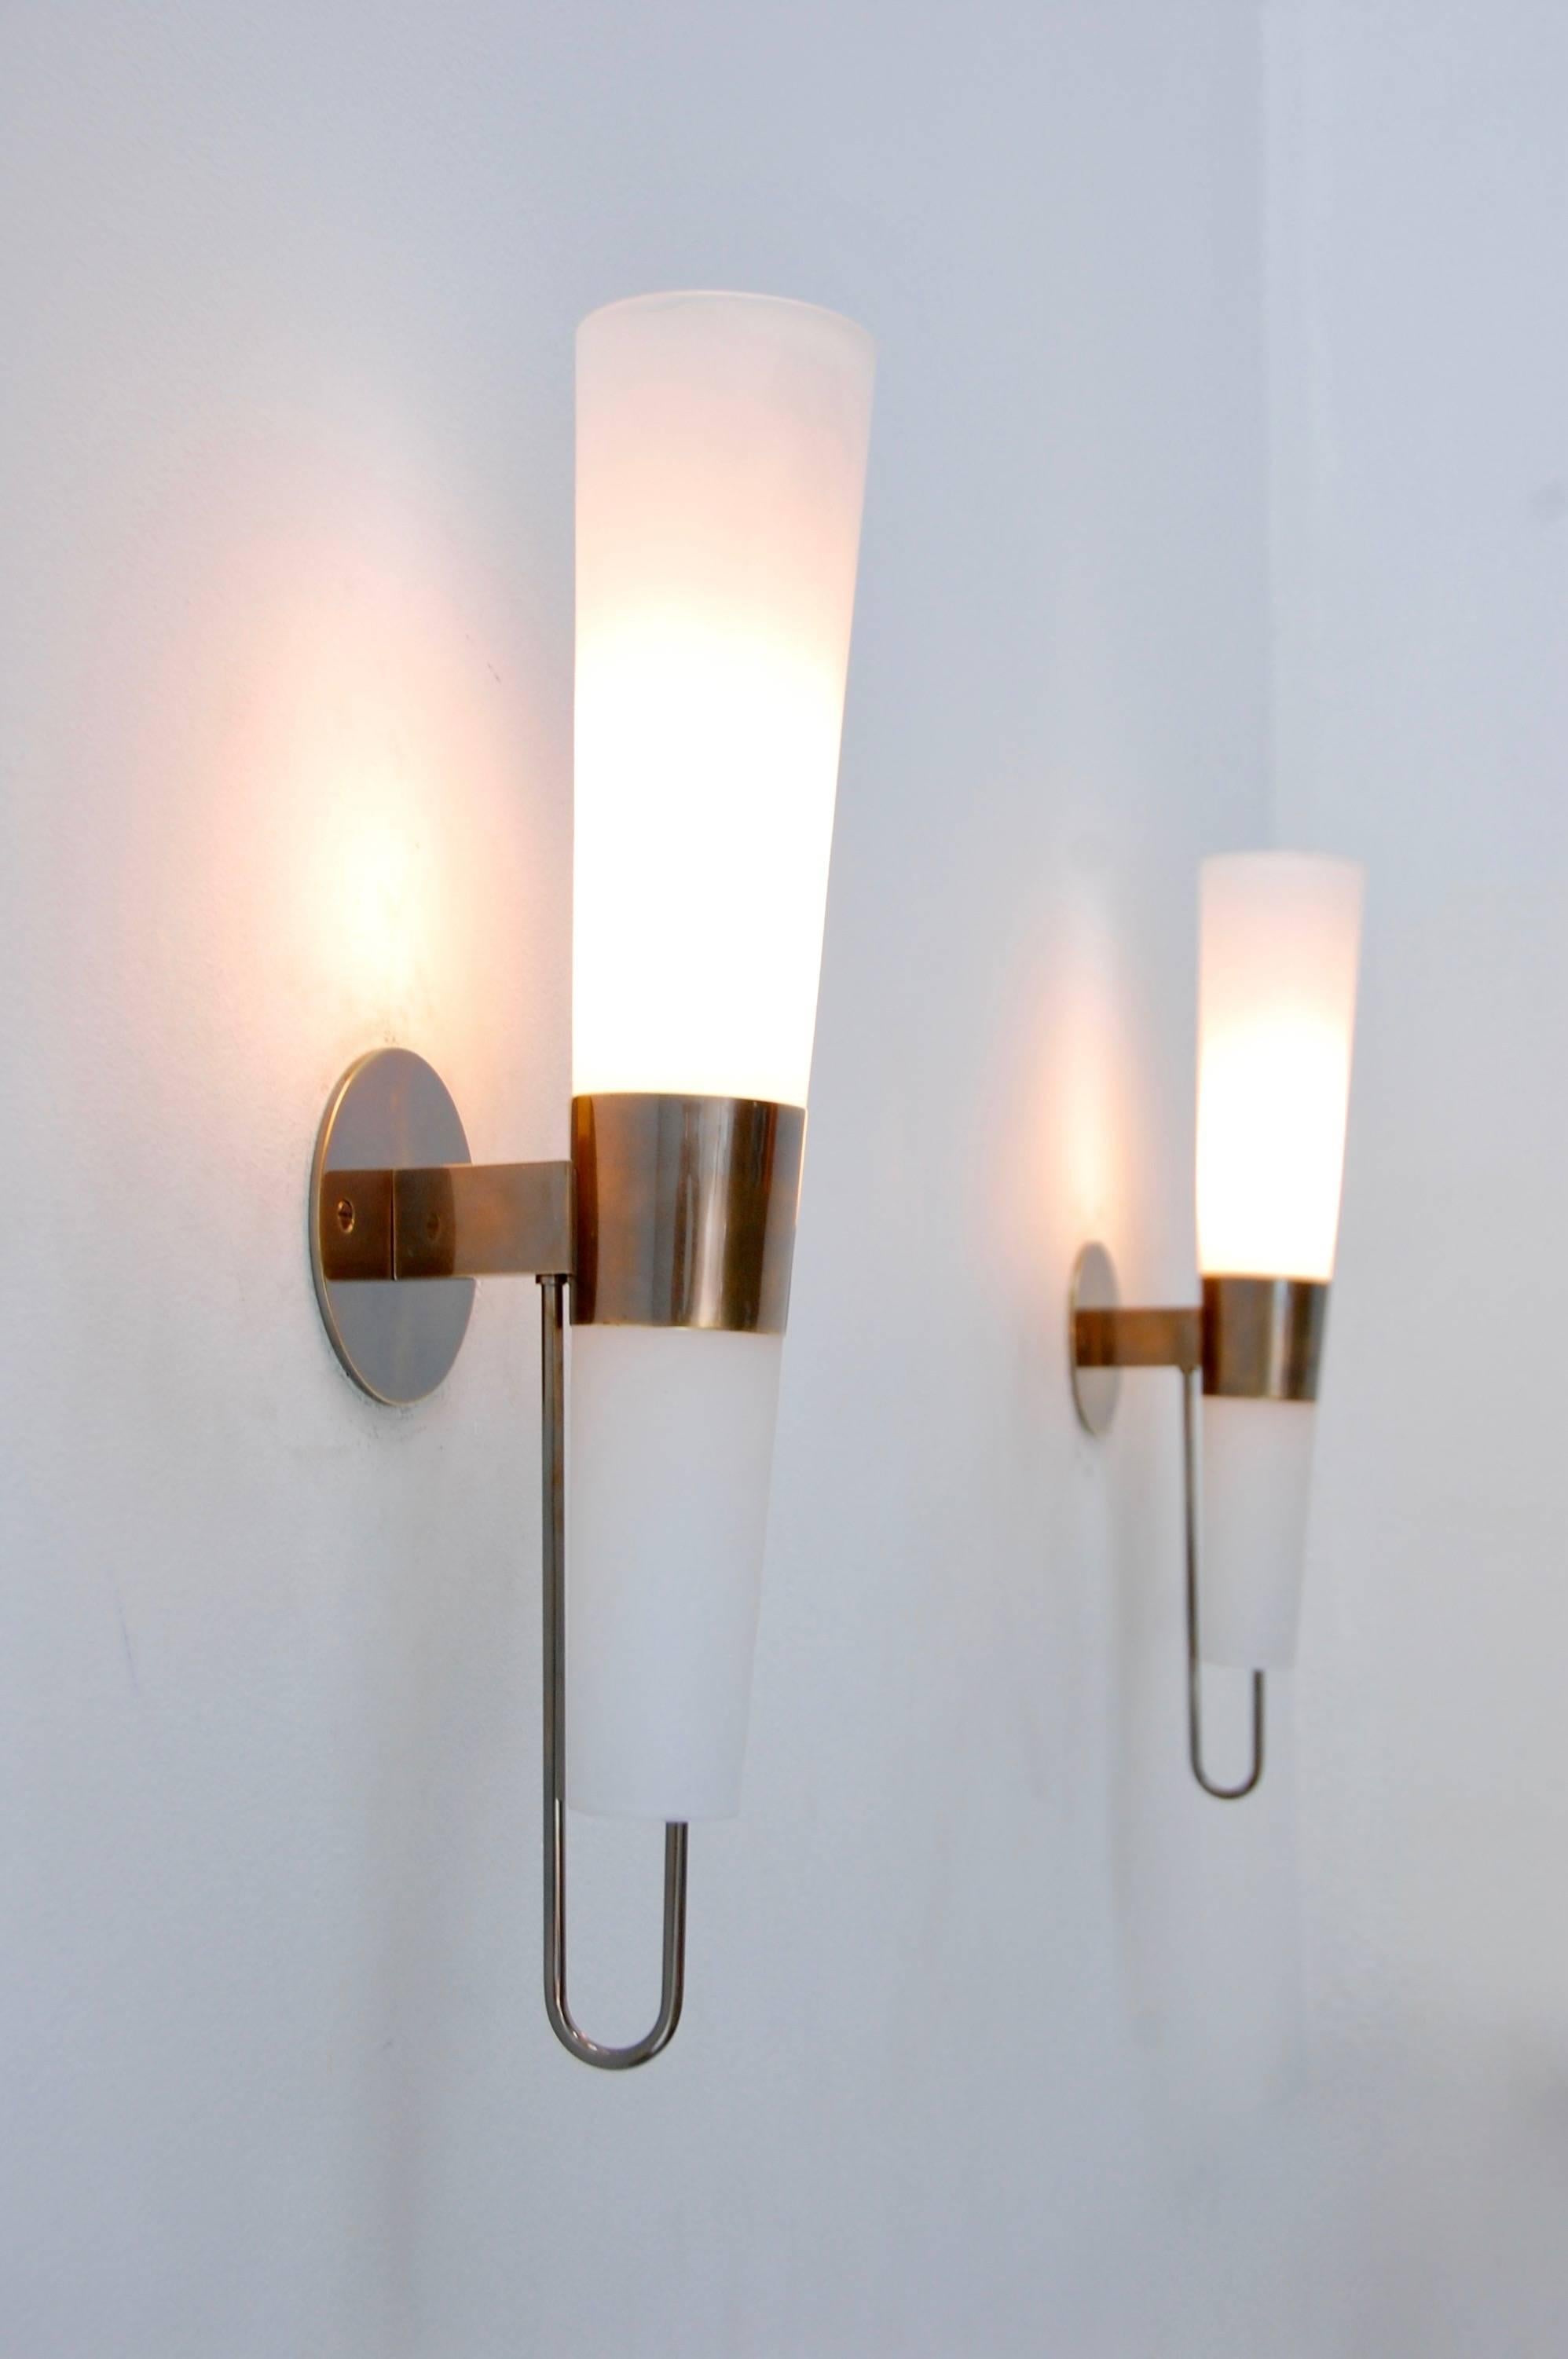 The LUchiere sconce is a wonderful and sleek bronze torchier sconce in a rich aged patinated brass finish and handblown glass shades. Based on an Italian design. Single medium based socket per sconce. Priced individually.
Measures: Height: